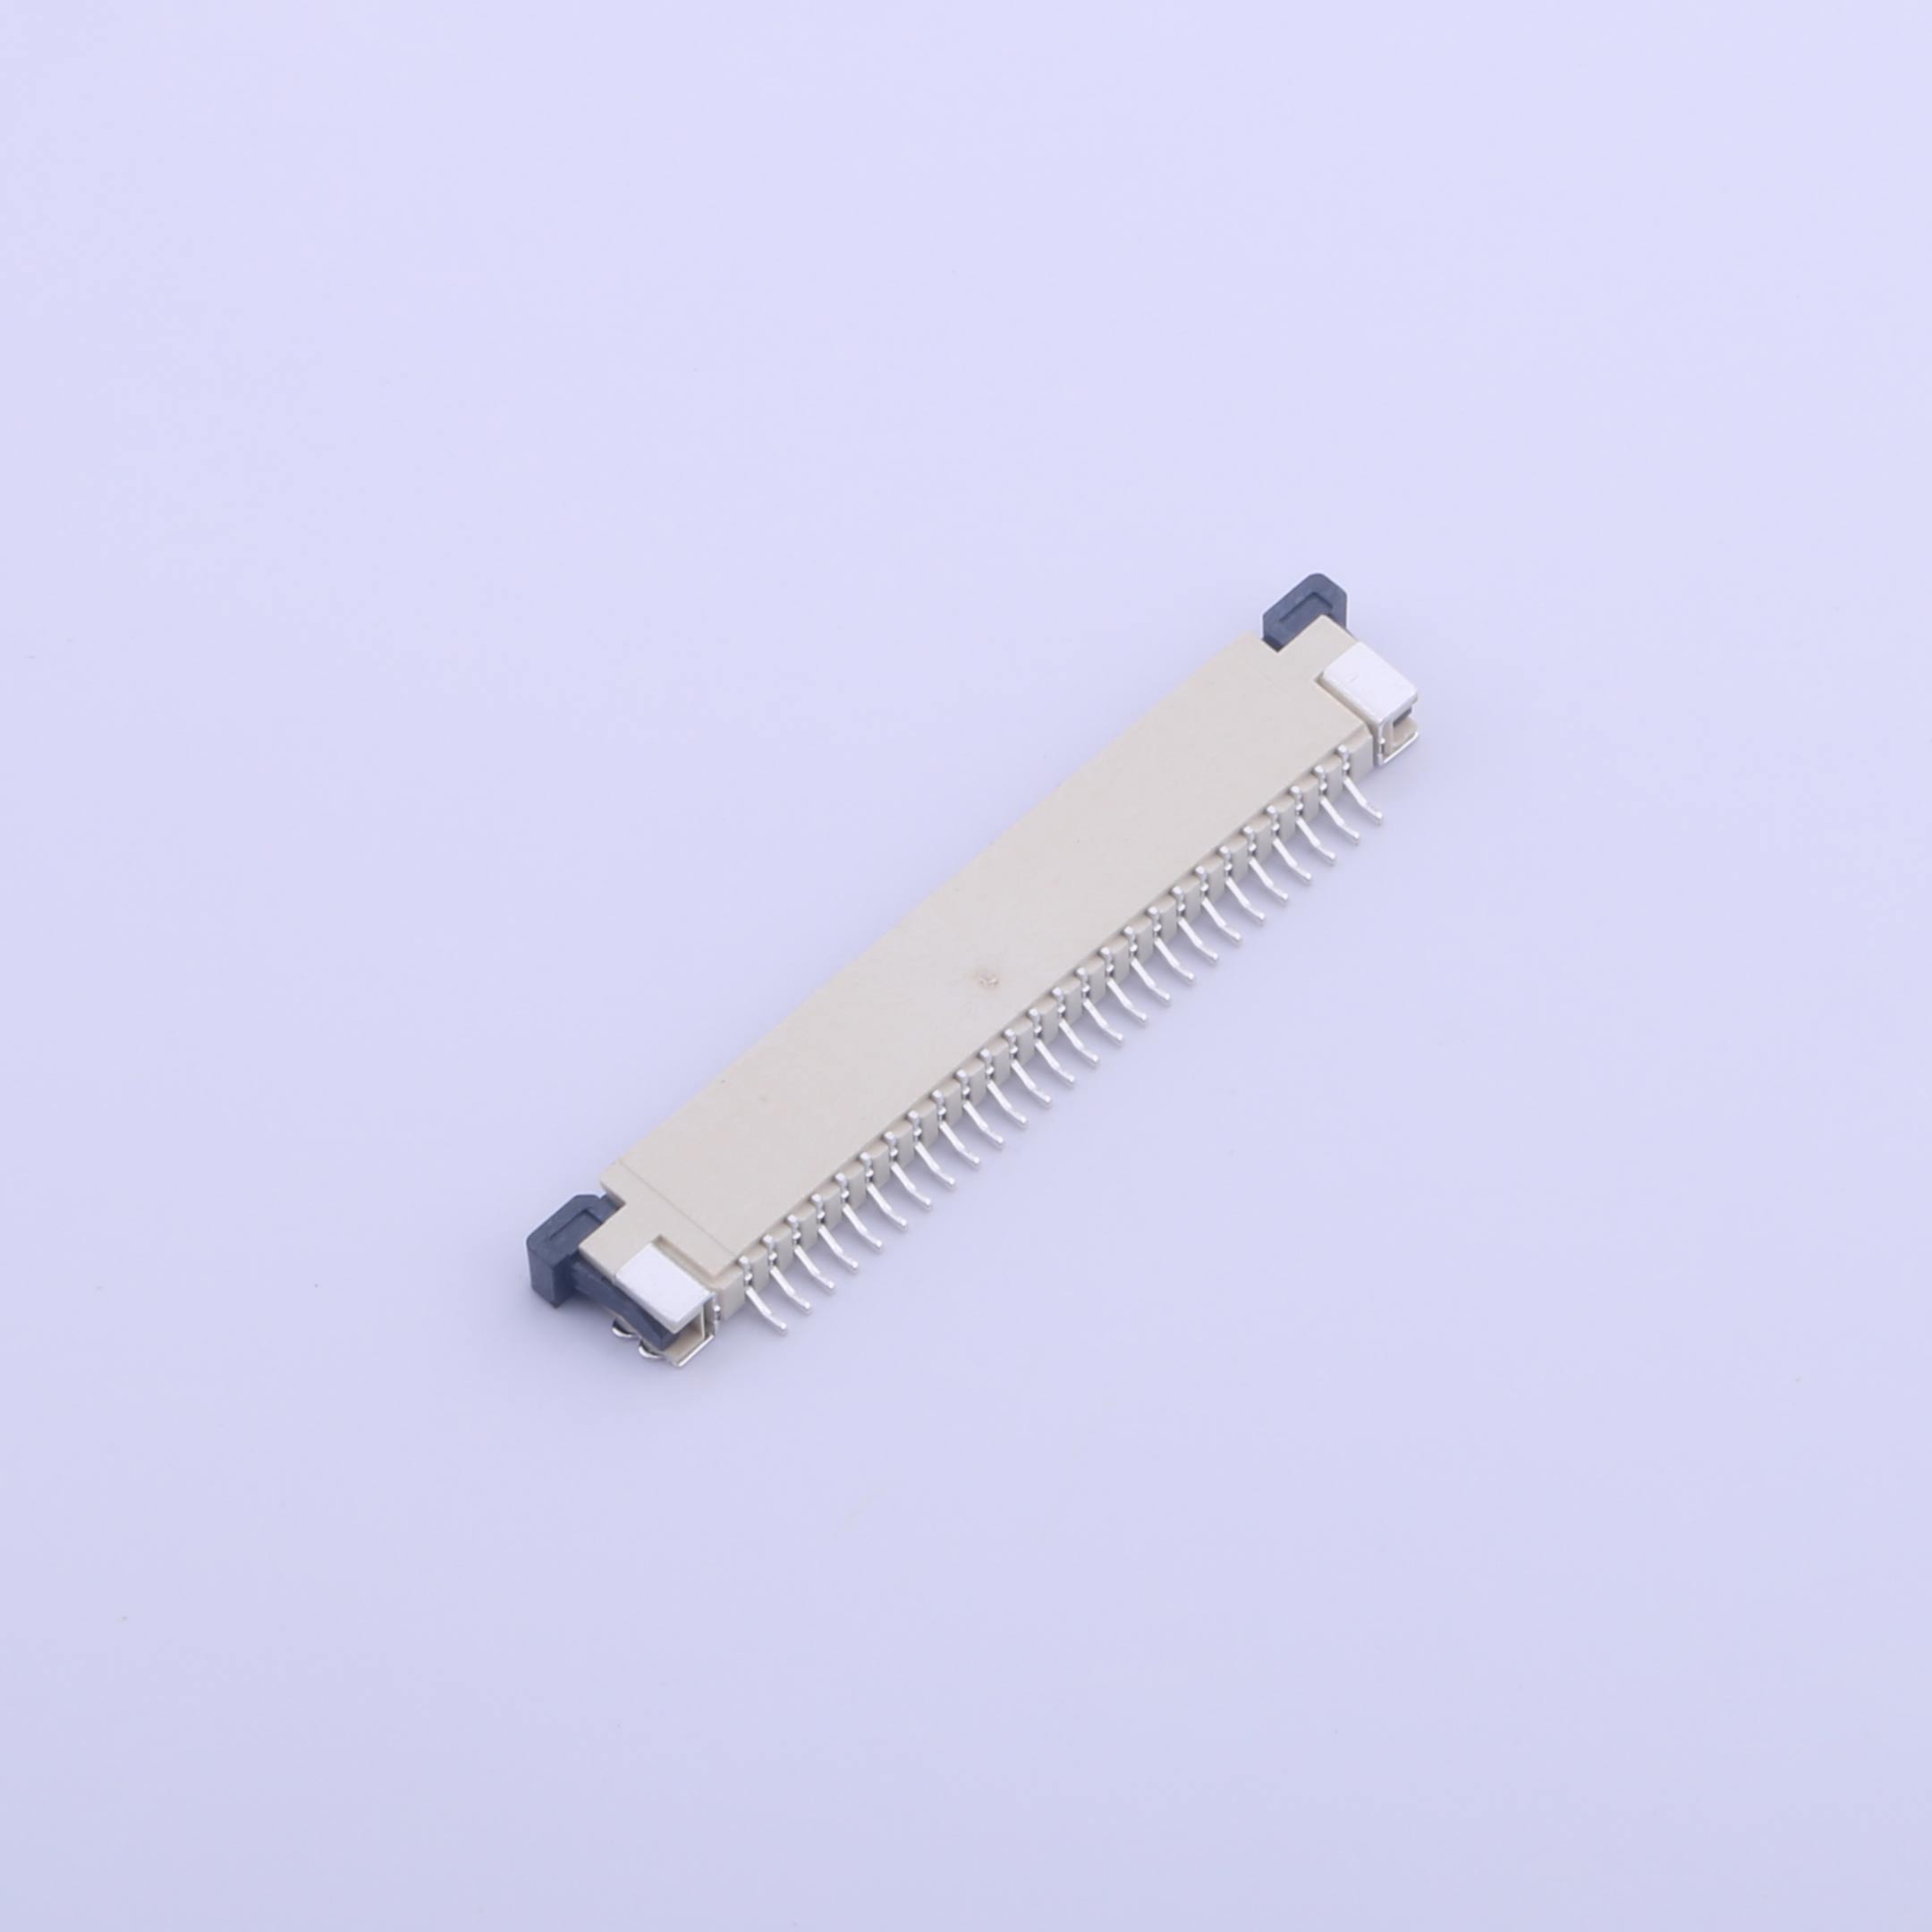 Kinghelm FFC/FPC Connector 26P Pitch 1mm - KH-CL1.0-H2.5-26PS